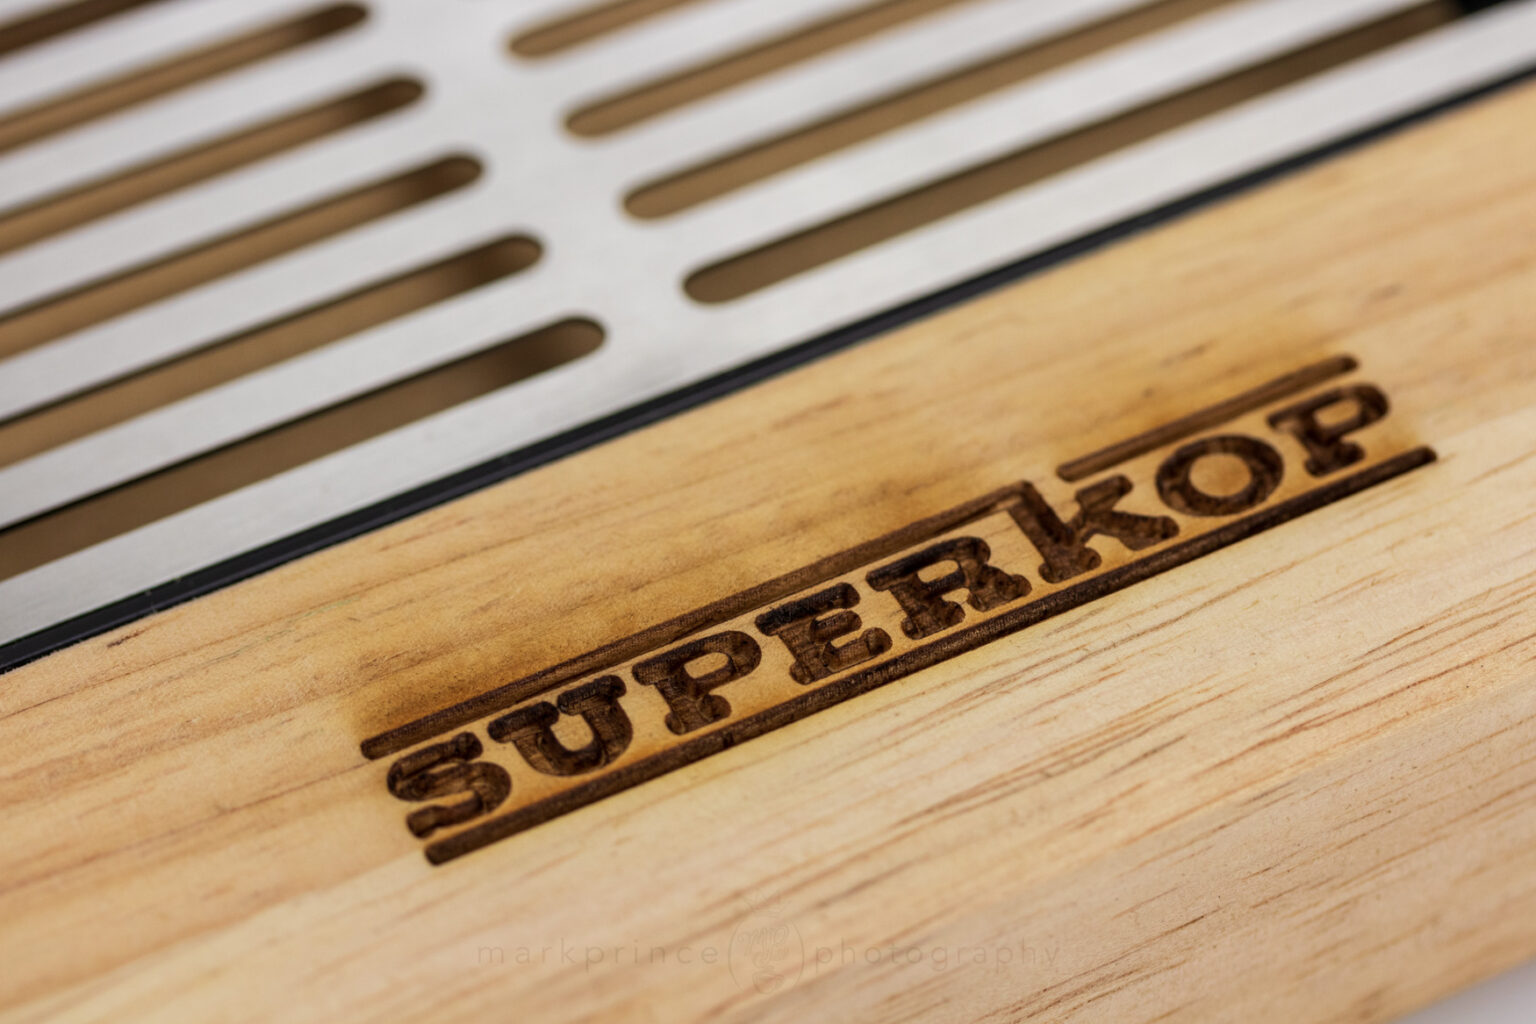 Burned in logo detail on the Superkop wood base